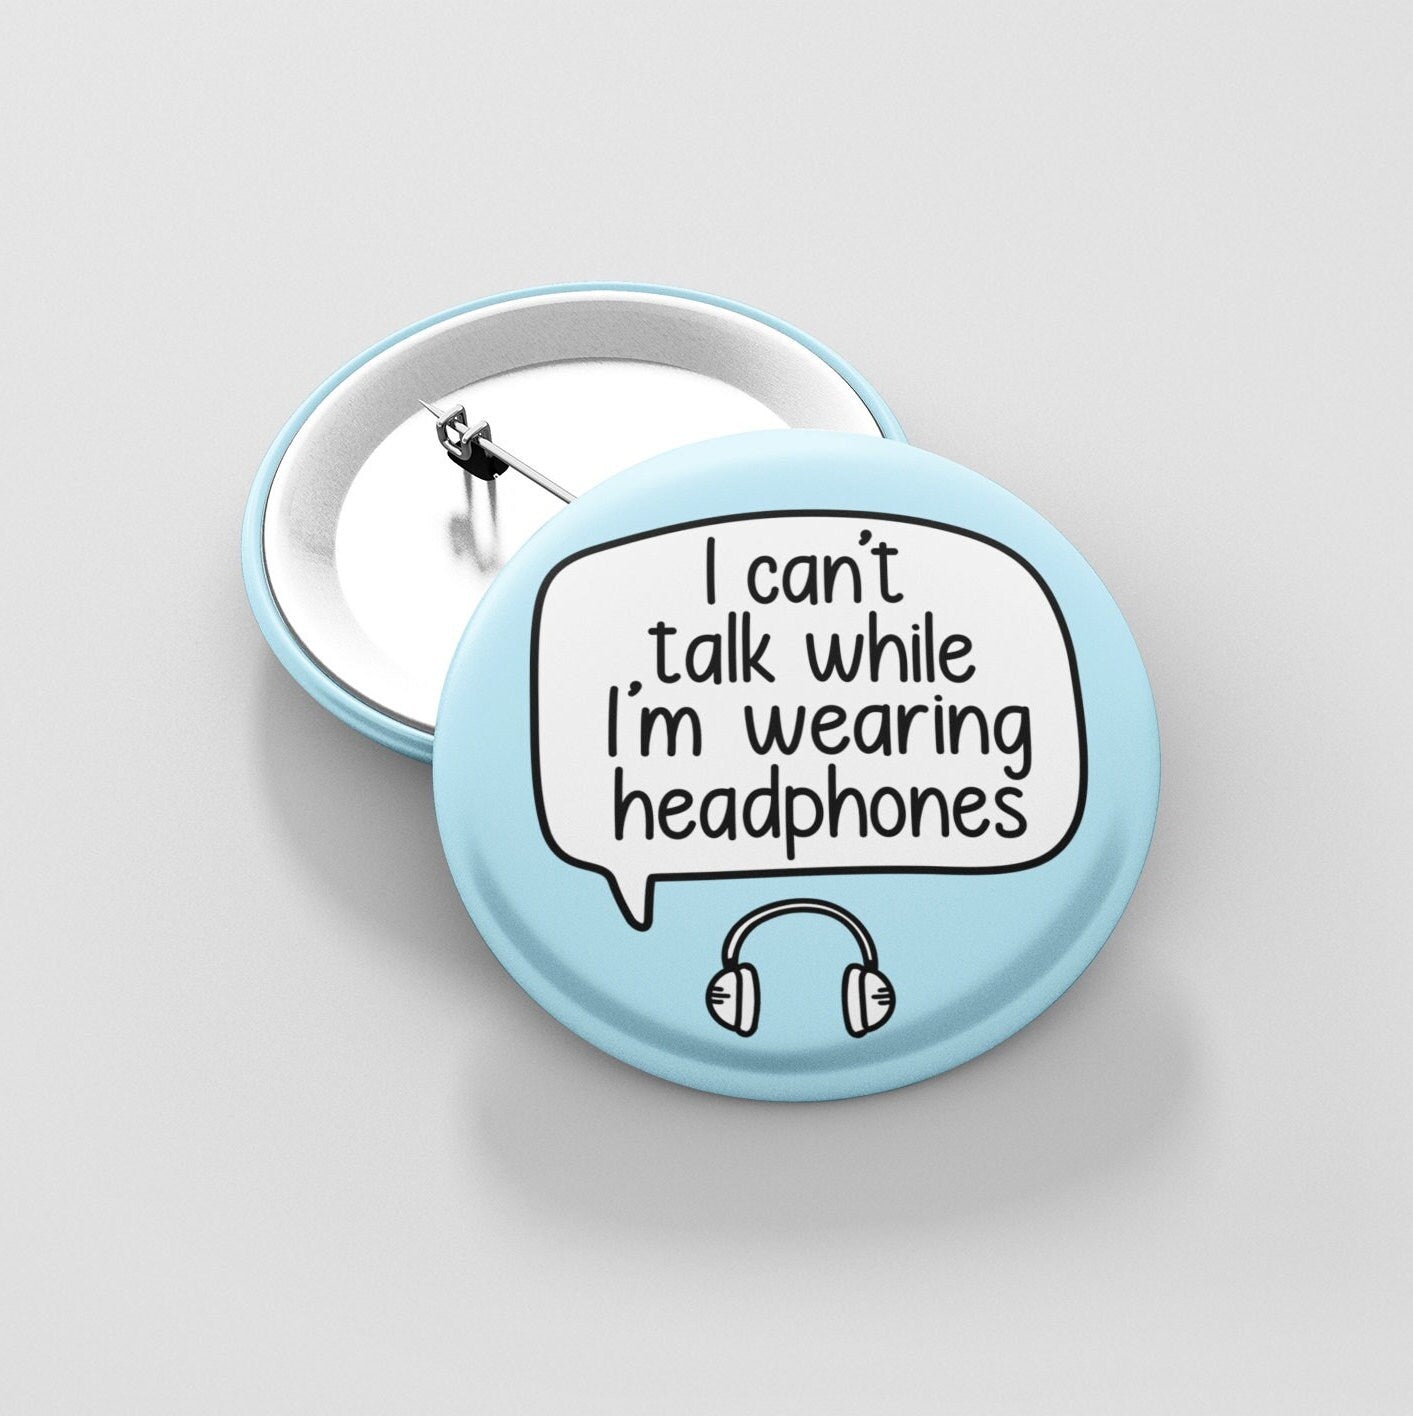 Can't Talk While Wearing Headphones - Pin Badge | Pins For Backpack - Sensory Gift